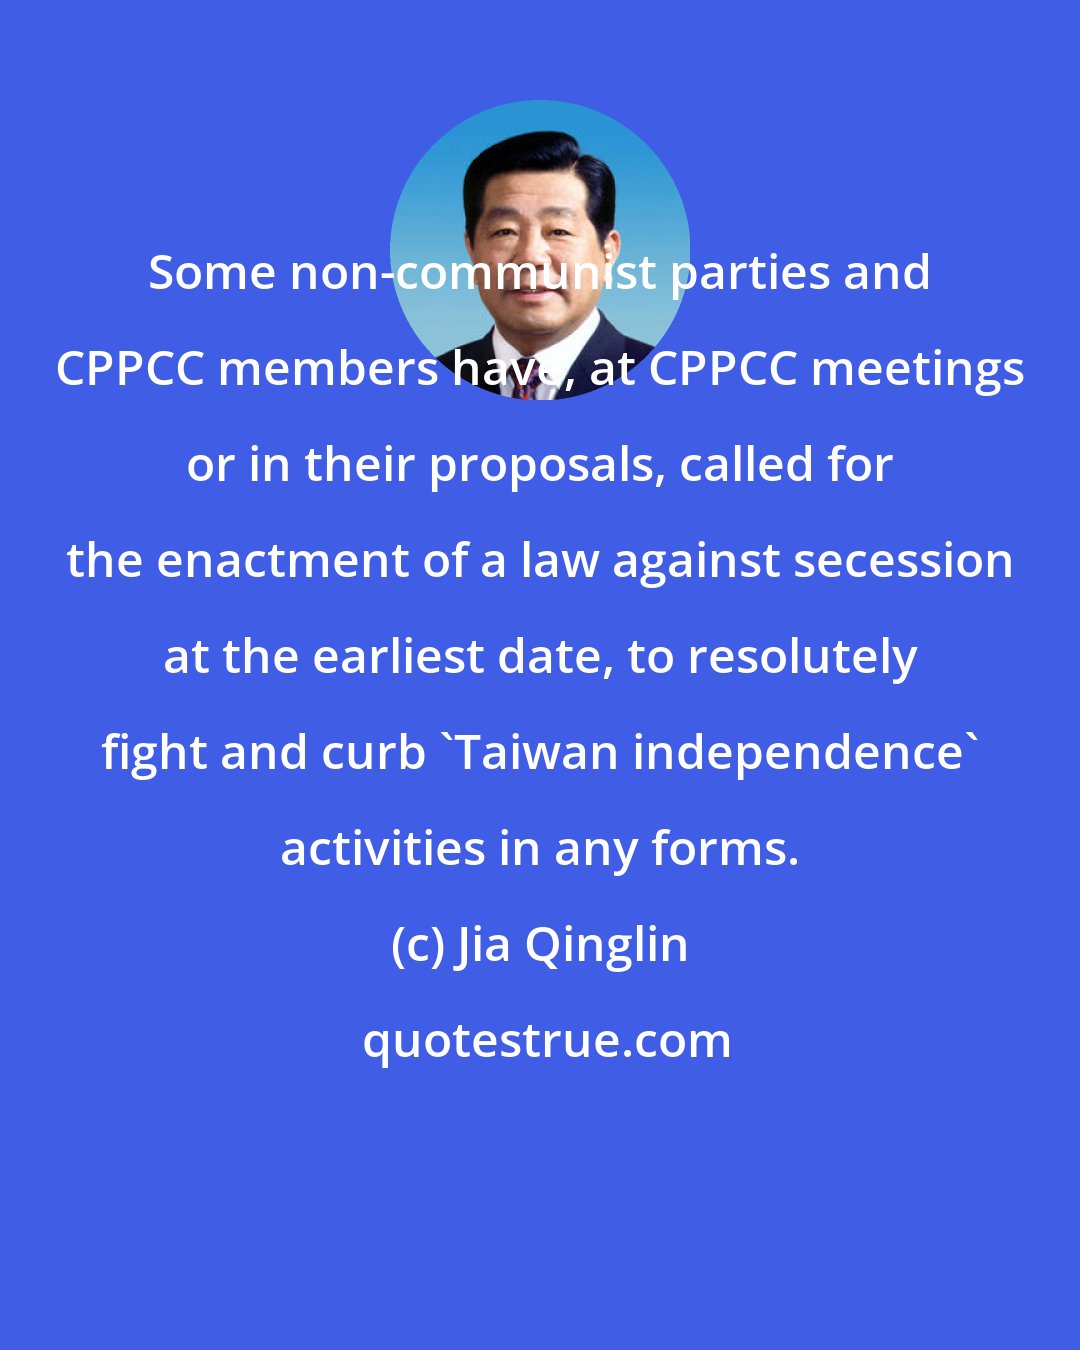 Jia Qinglin: Some non-communist parties and CPPCC members have, at CPPCC meetings or in their proposals, called for the enactment of a law against secession at the earliest date, to resolutely fight and curb 'Taiwan independence' activities in any forms.